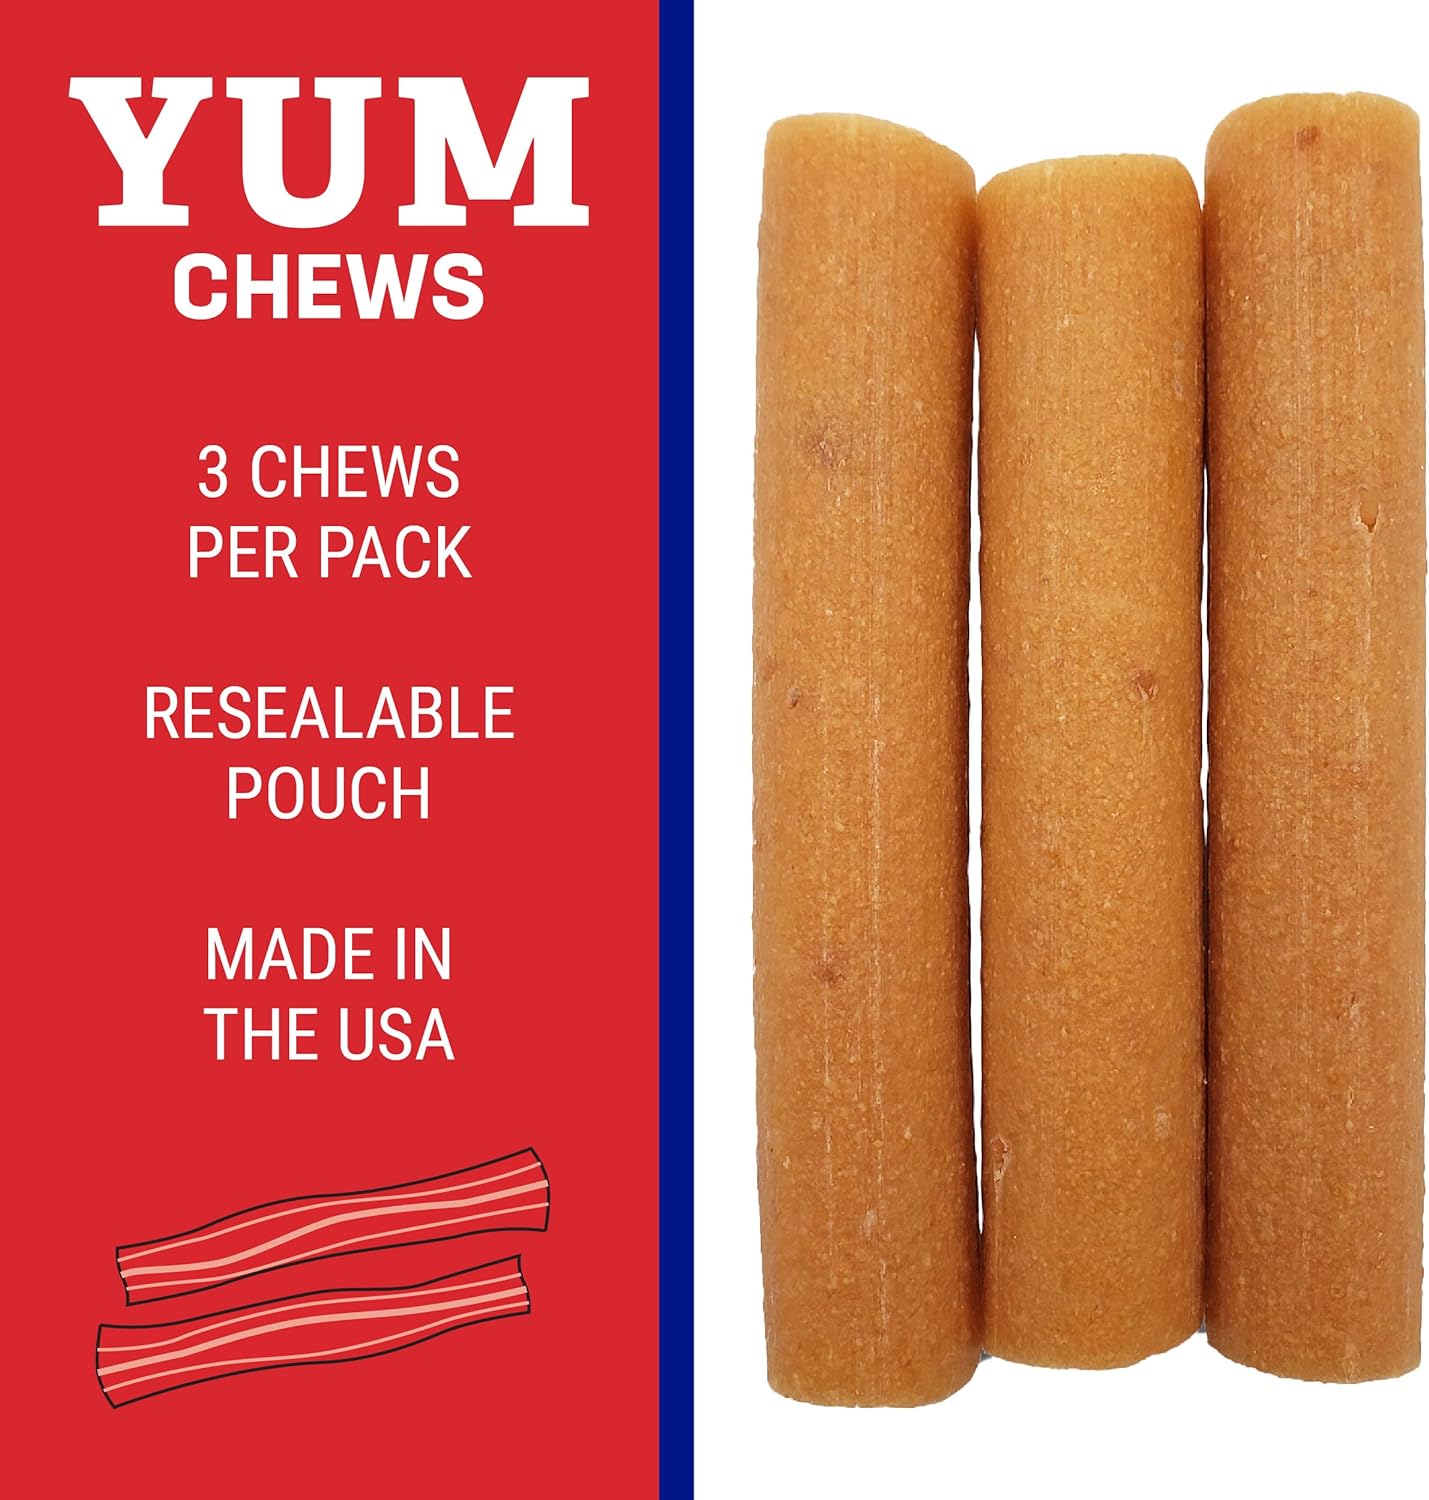 Himalayan Dog Chew Yak Cheese Dog Chews, 100% Natural, Long Lasting, Gluten Free, Healthy & Safe Dog Treats, Lactose & Grain Free, Protein Rich, For All Breeds, Medium, Bacon Flavor, 4.5 oz